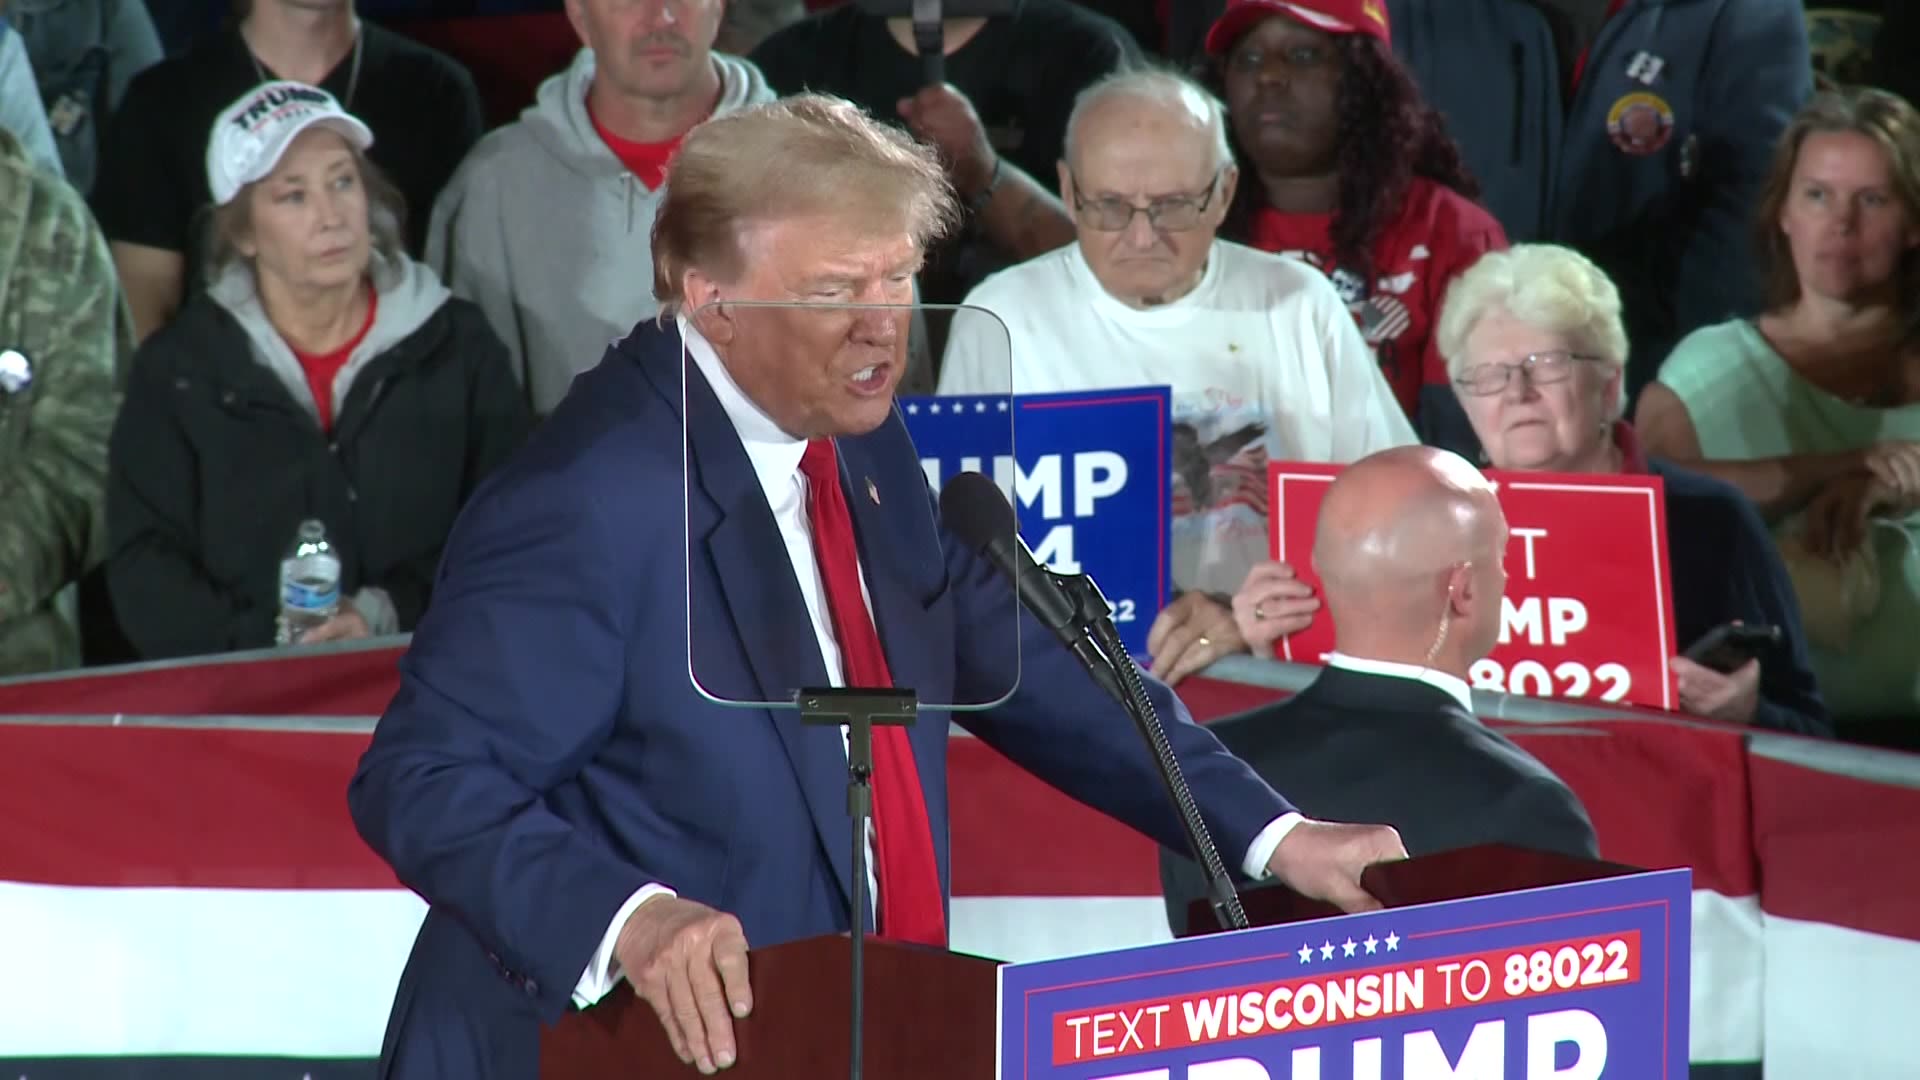 Highlights from Donald Trump's rally in Waukesha